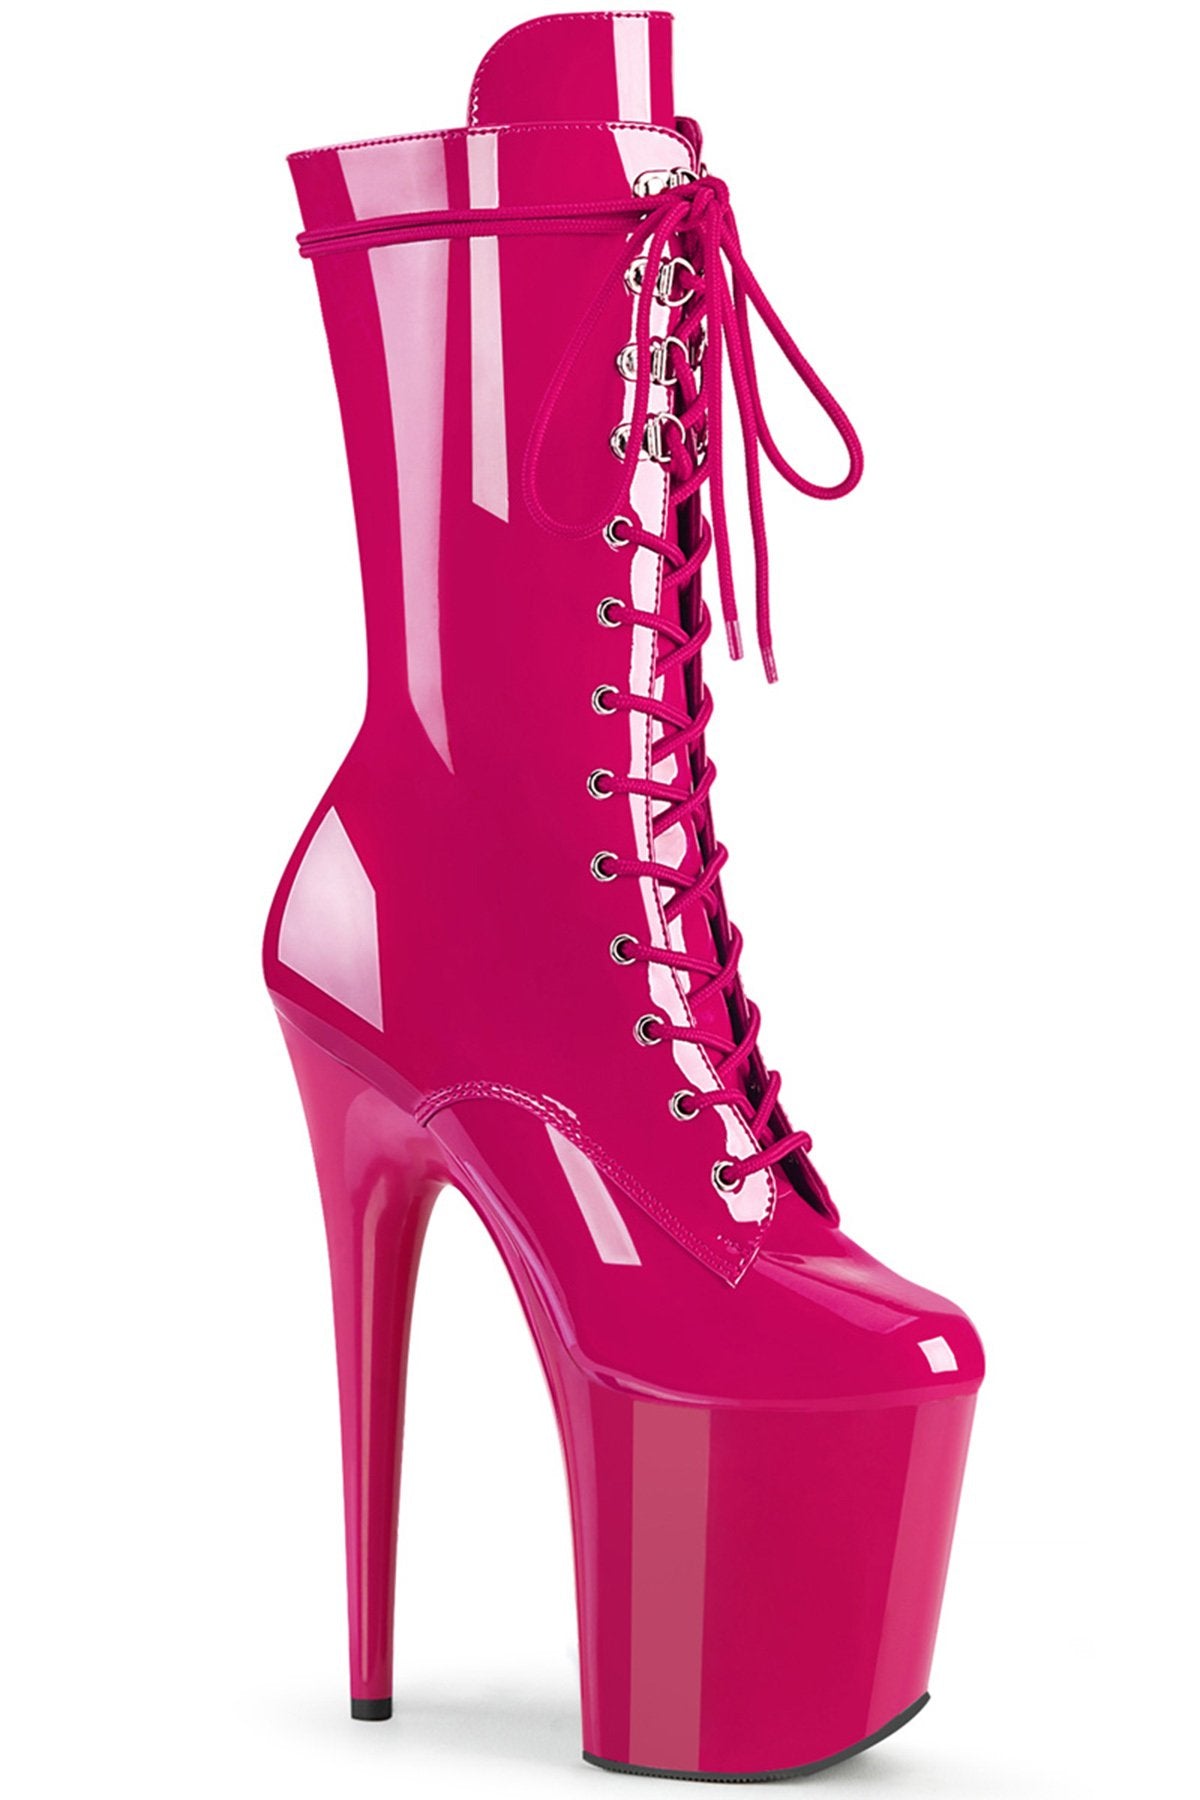 Pleaser USA Flamingo-1050 8inch Pleaser Boots - Patent Hot Pink 